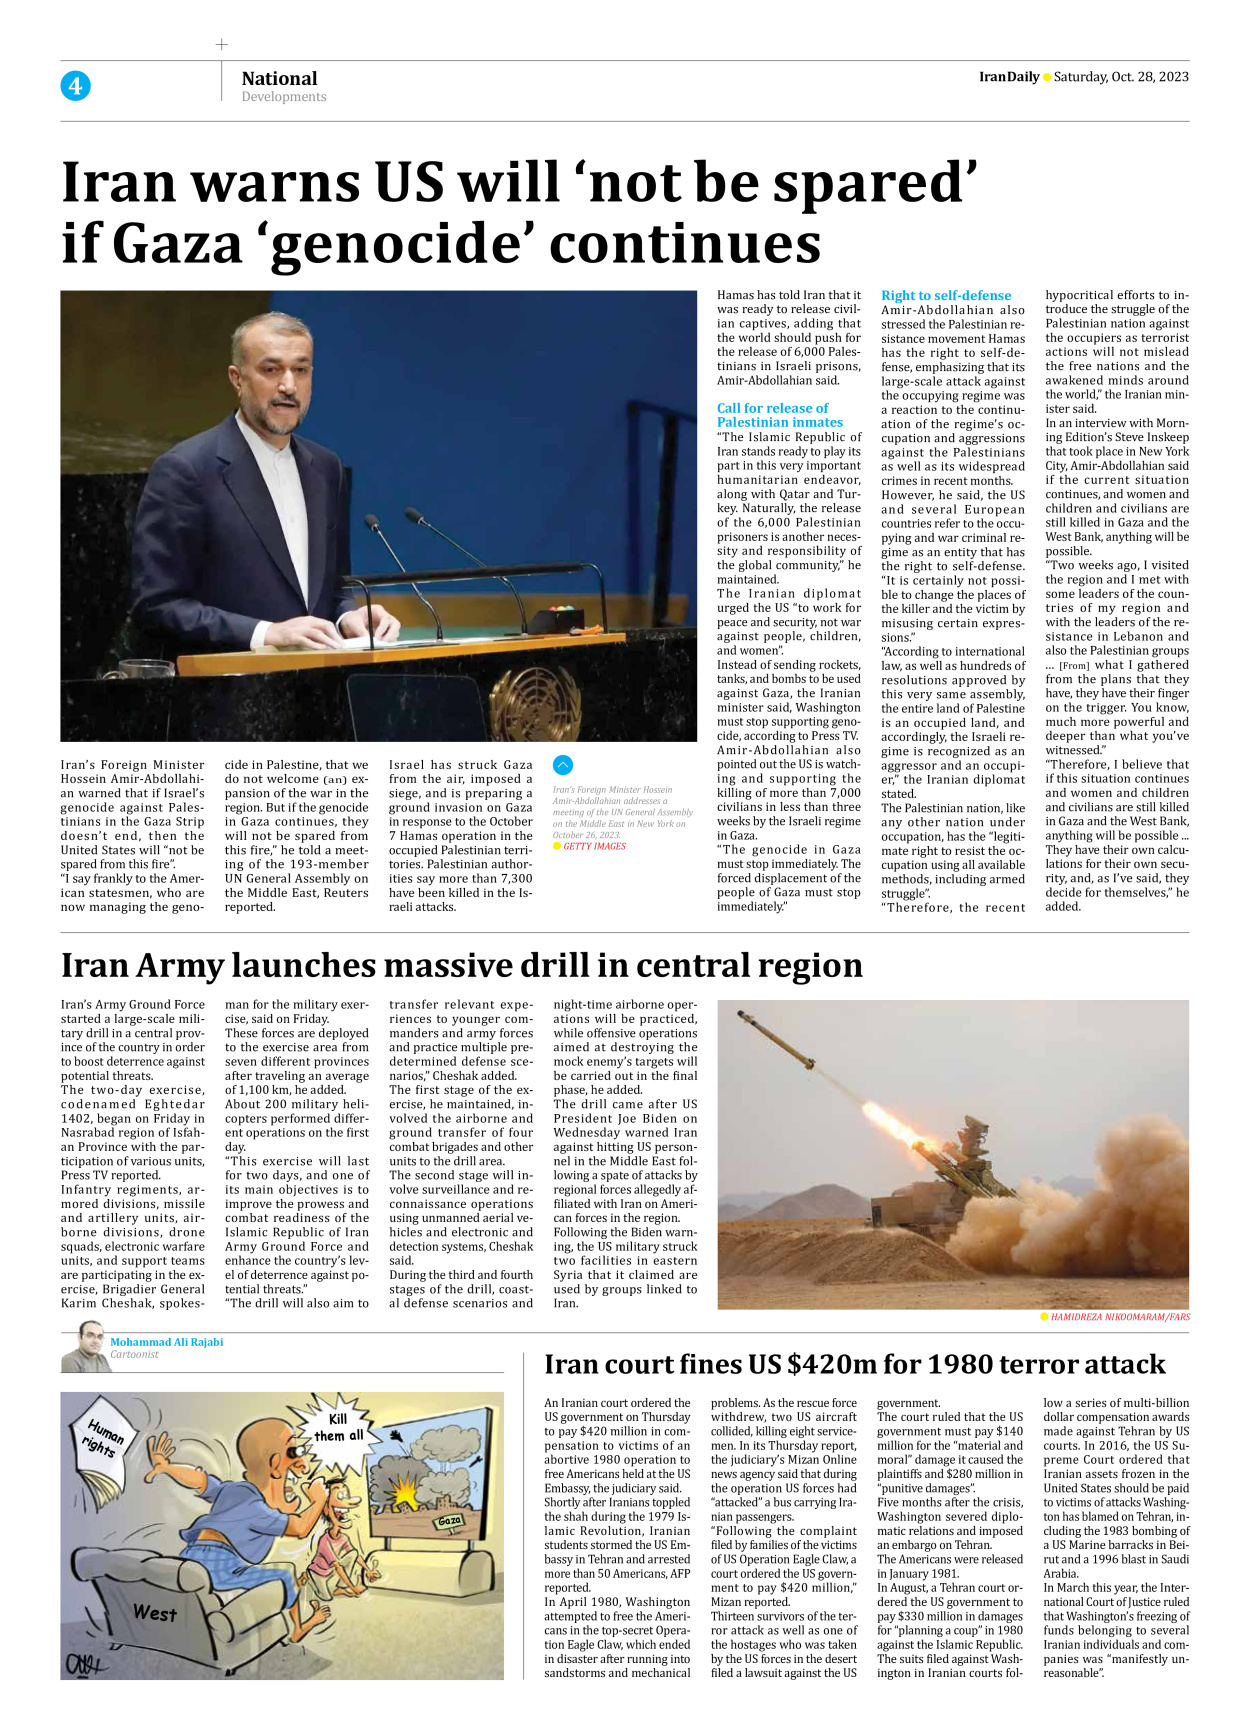 Iran Daily - Number Seven Thousand Four Hundred and Nineteen - 28 October 2023 - Page 4